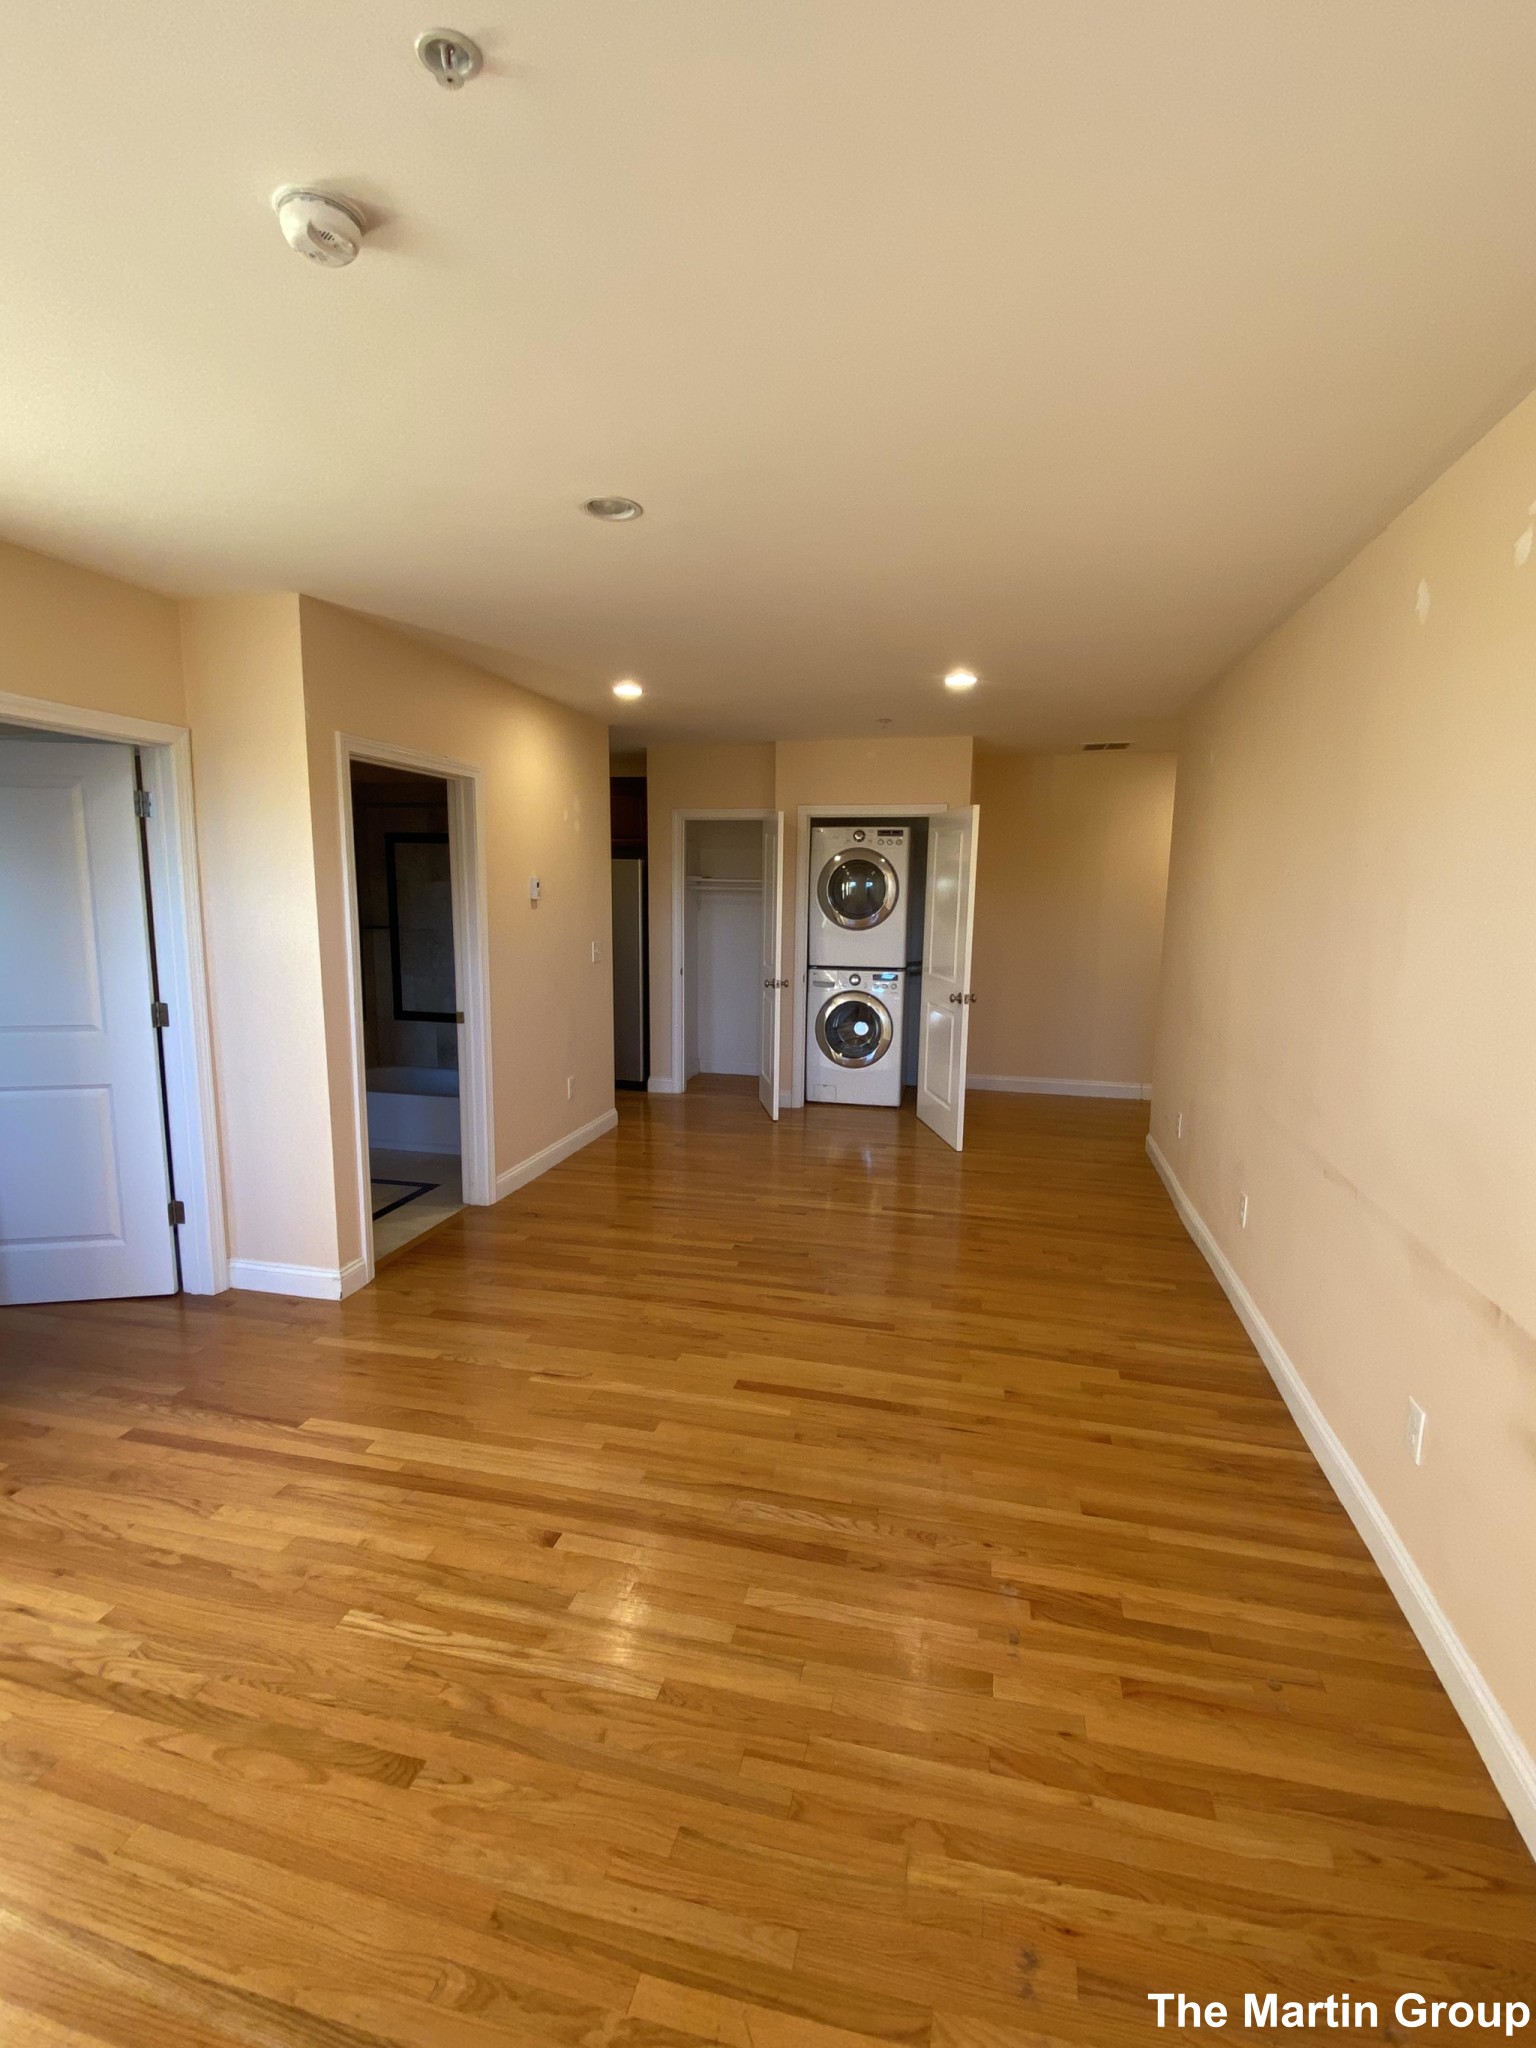 Photos of apartment on Partridge Ave.,Somerville MA 02145